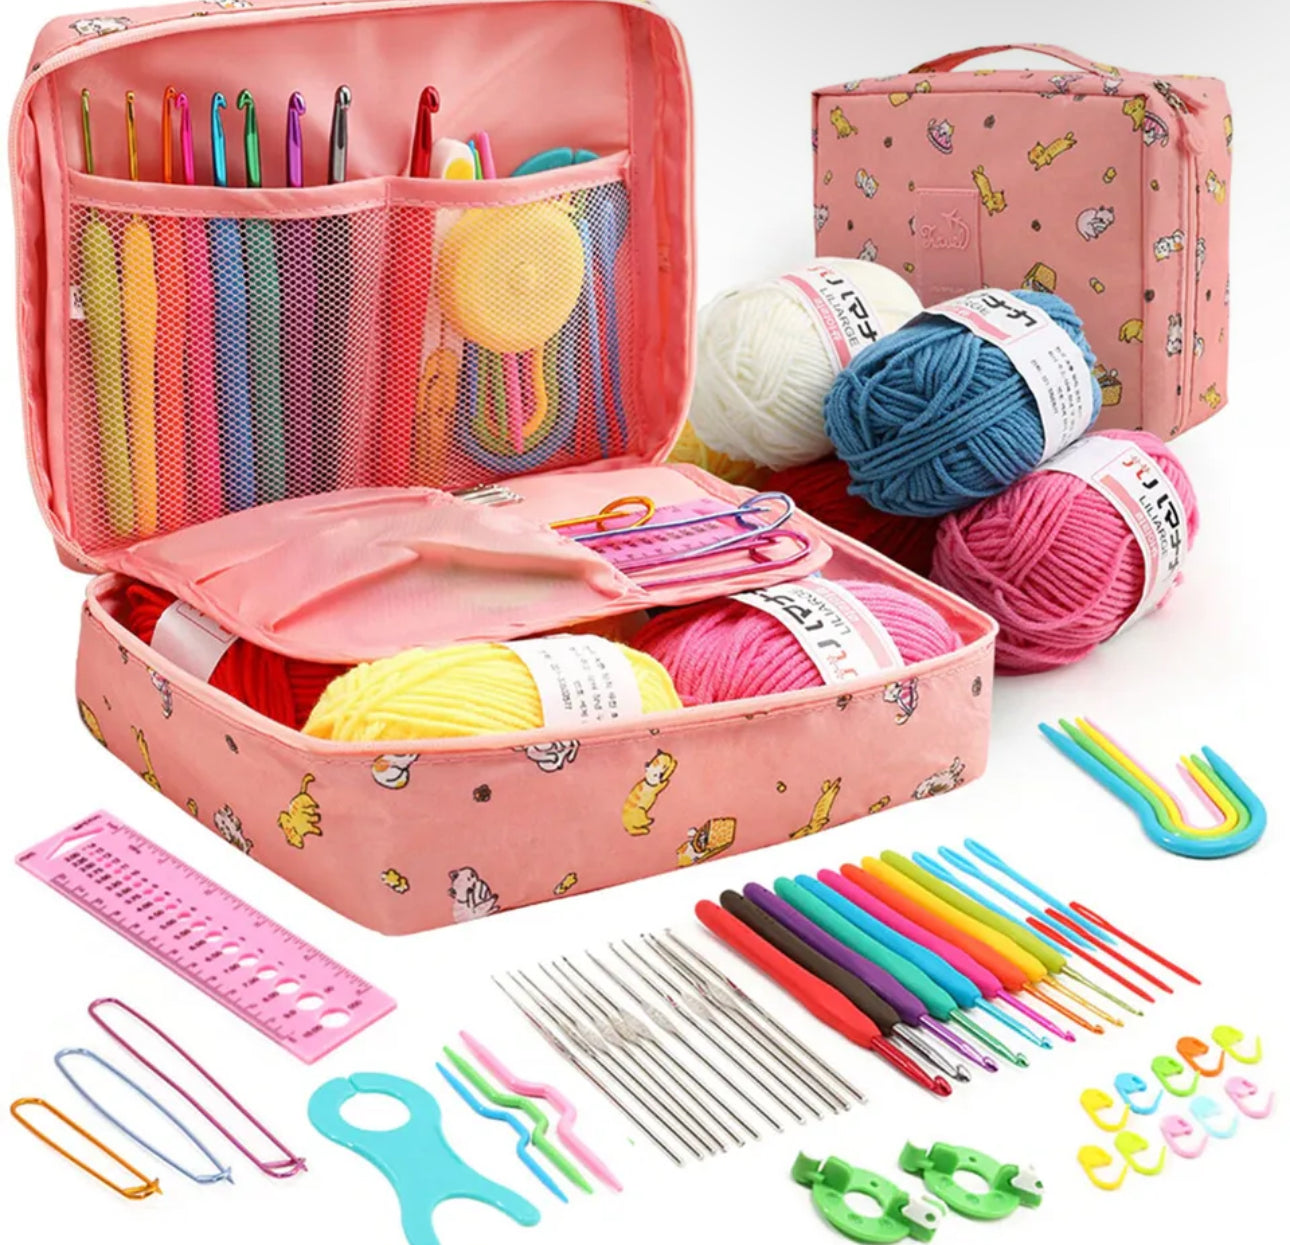 59pc Crochet Kit with Yarns for Beginners